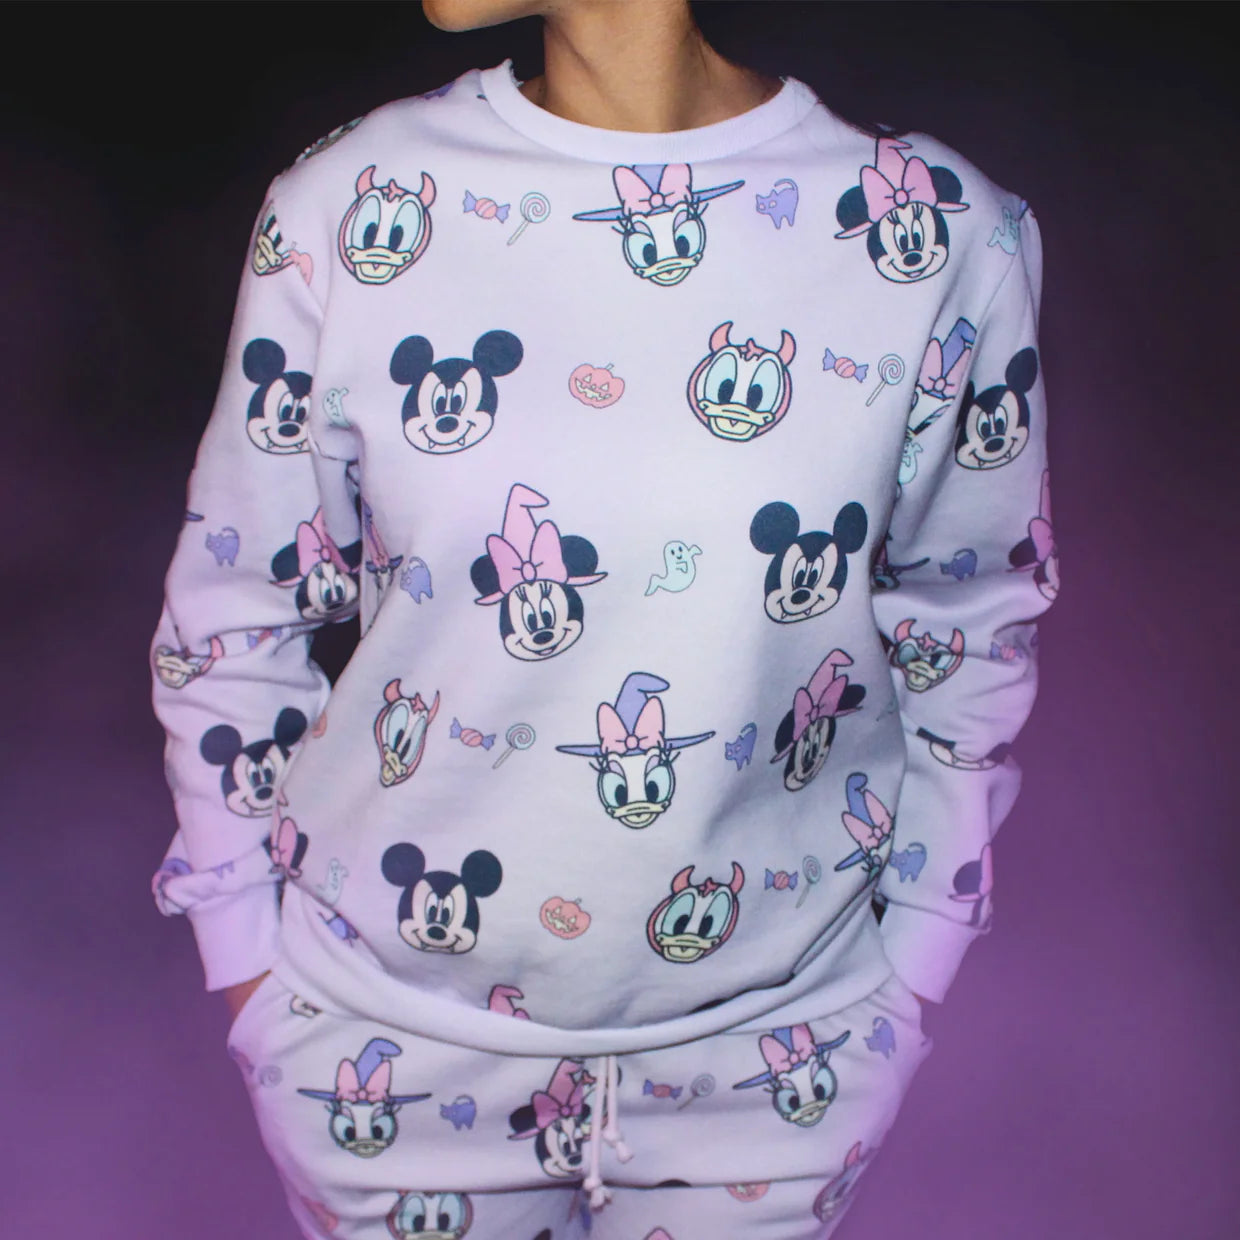 Halloween Mickey and Friends (Disney) Pastel Crew Neck Sweater by Cakeworthy